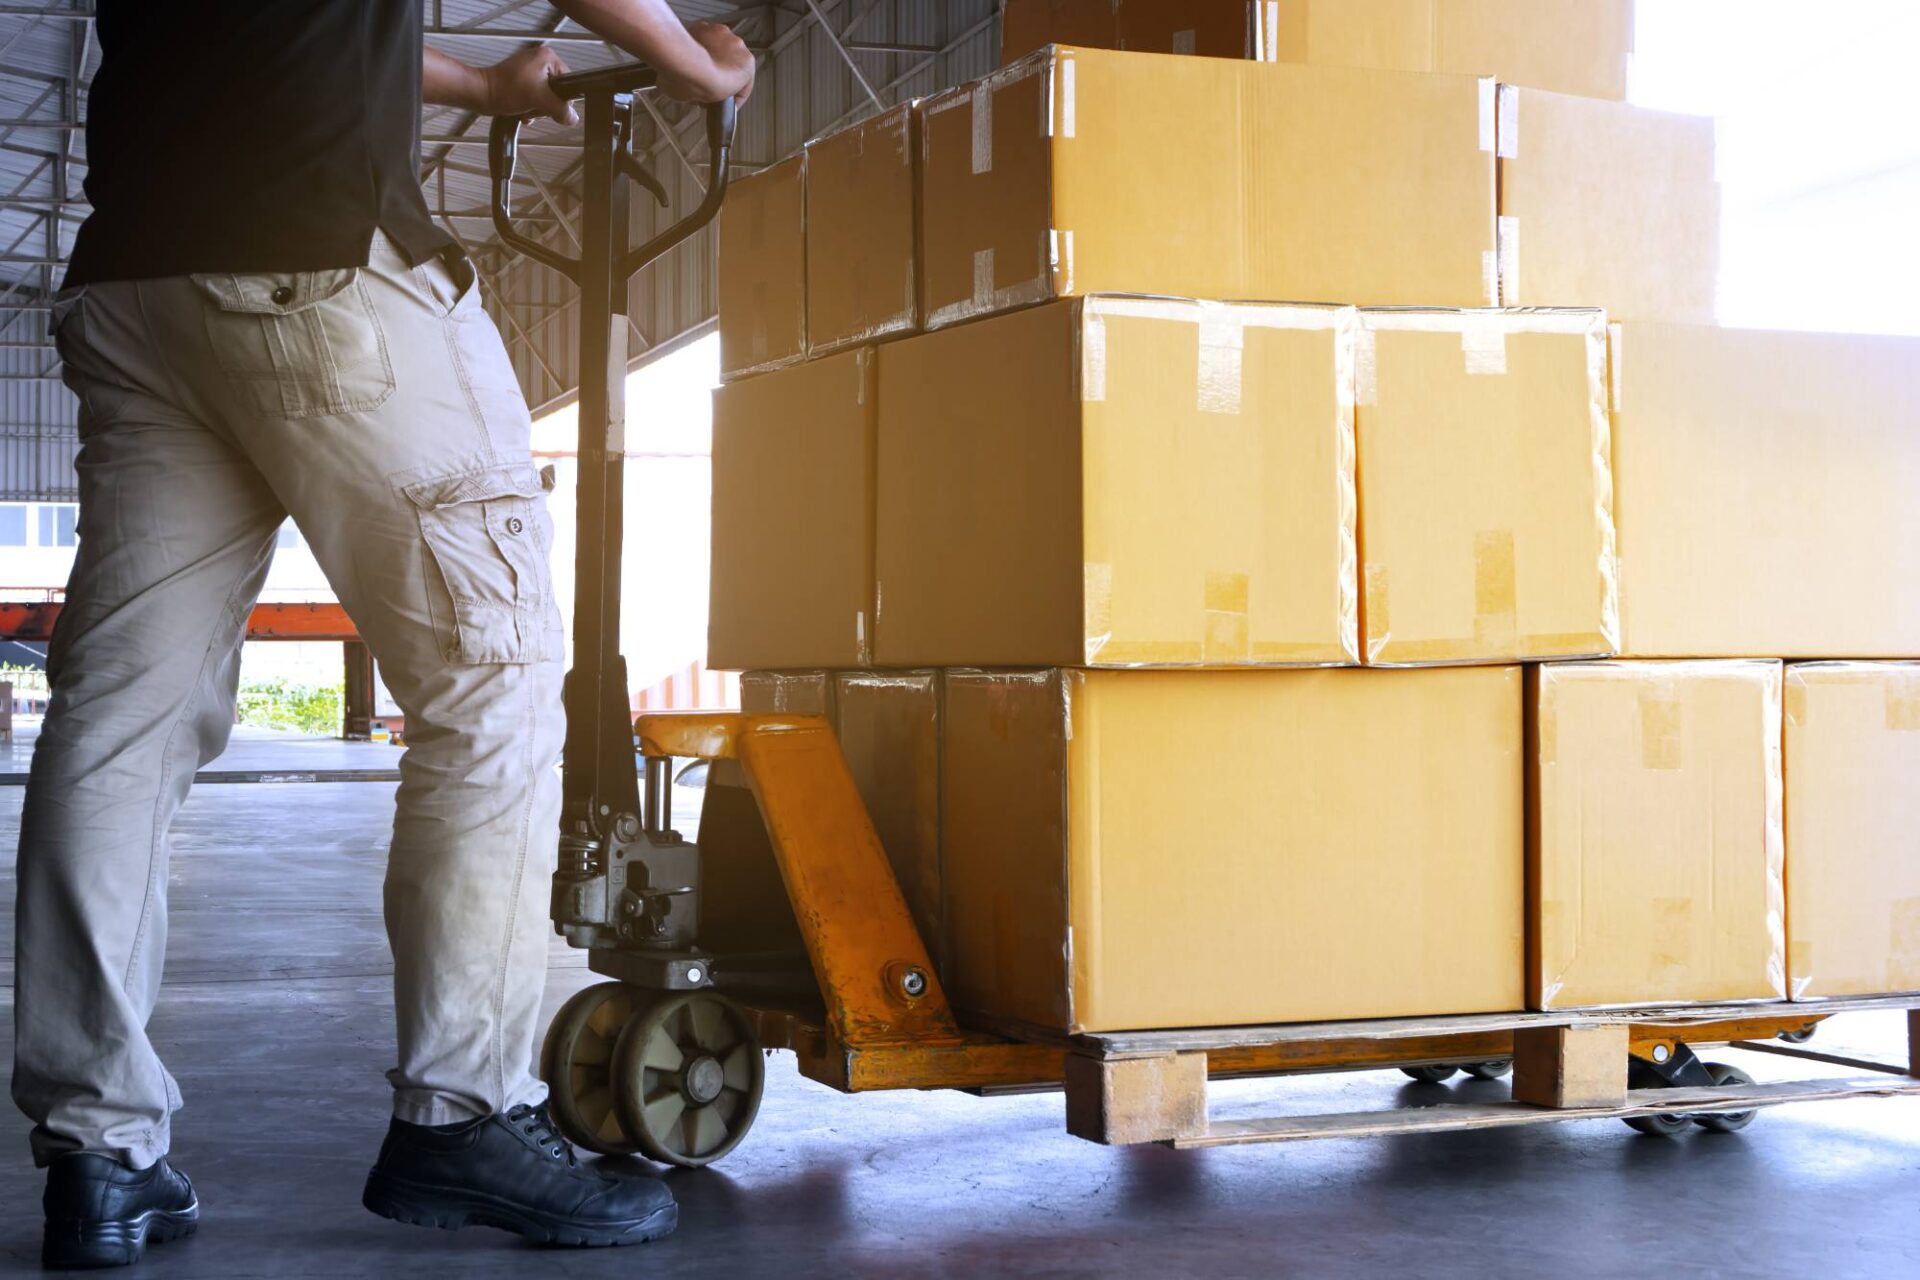 Warehouse worker working with hand pallet truck, stack package boxes on wooden pallet, cargo shipment transport and logistics